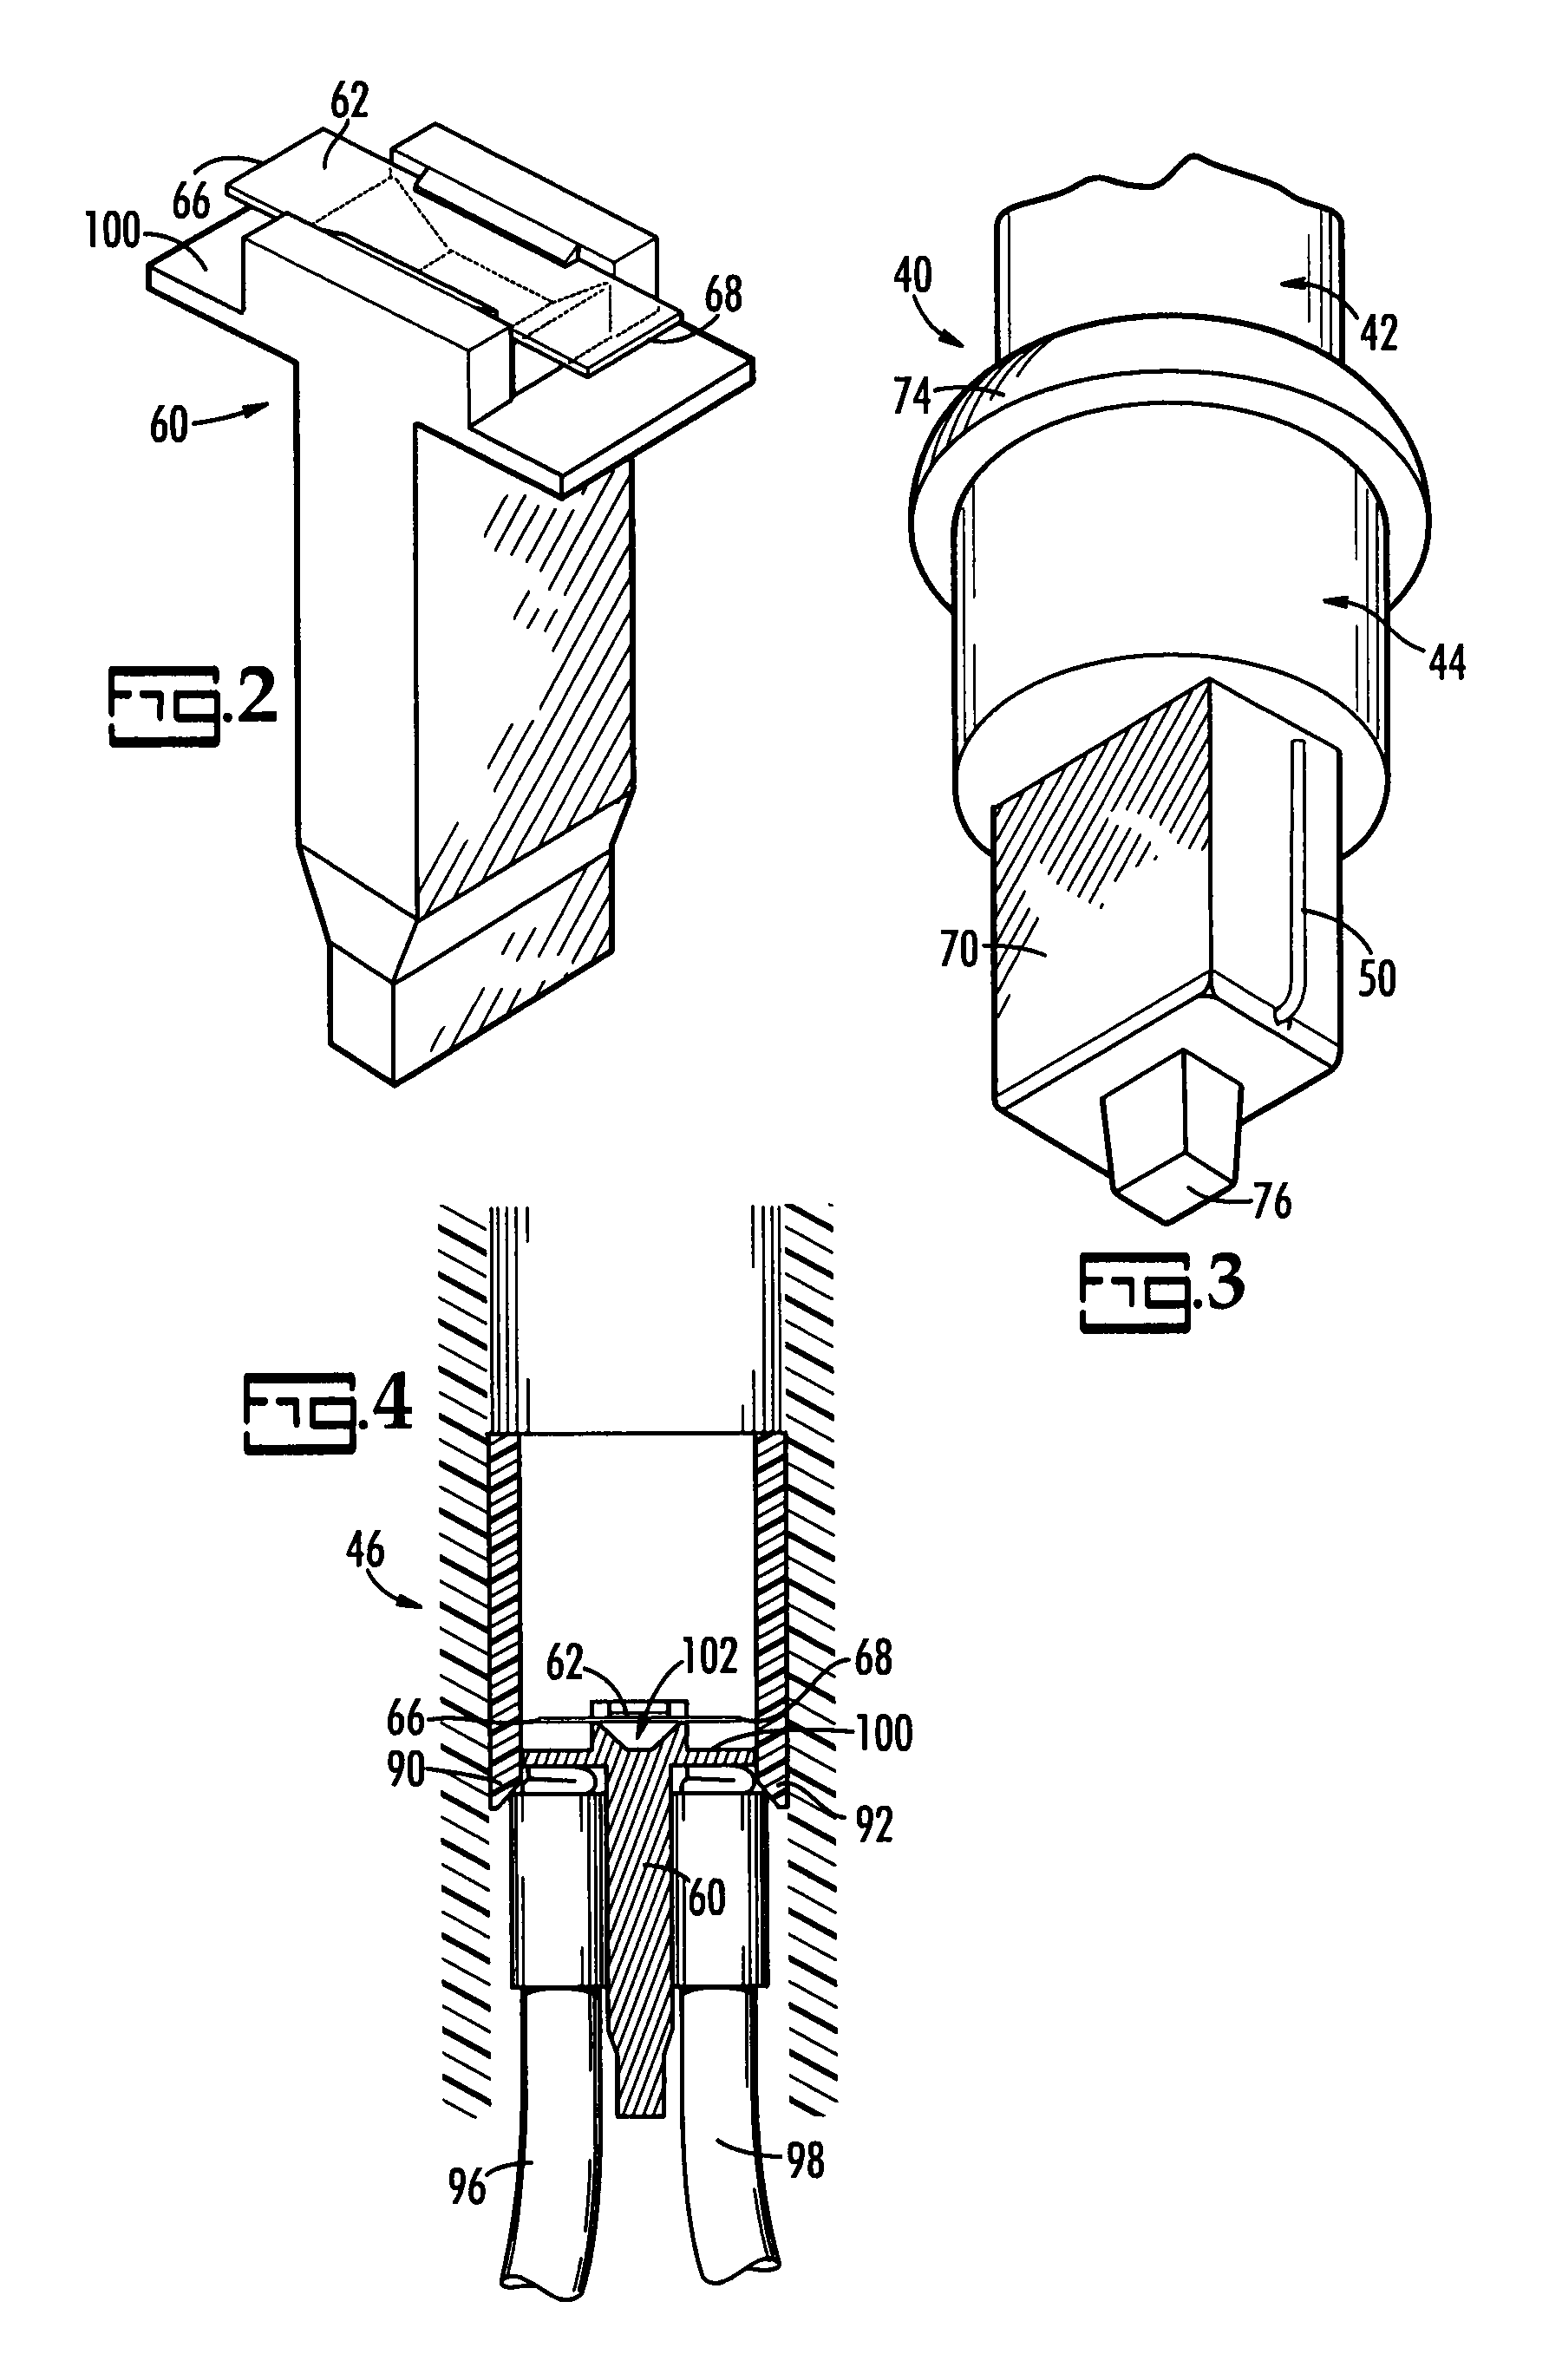 Mechanical shunt for use in a socket in a string of lights